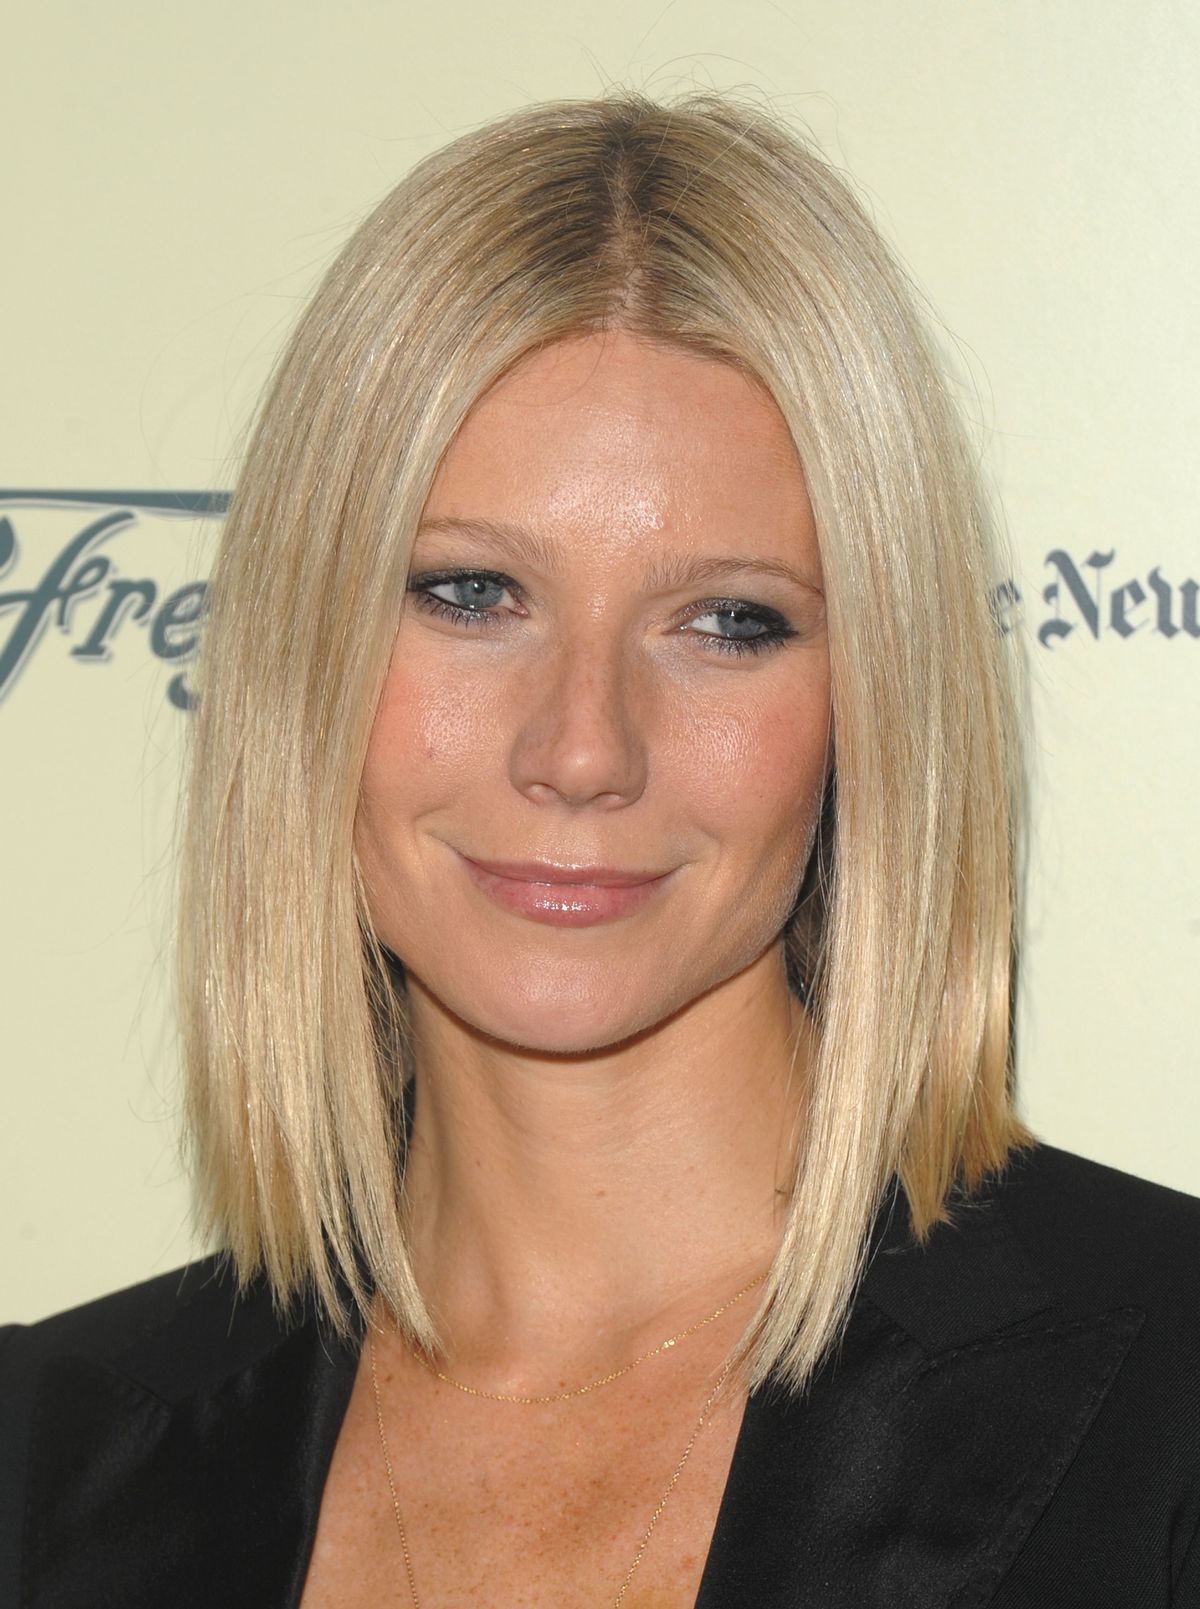 Actress Gwyneth Paltrow arrives at the launch party for the PBS television series of "Spain...on the Road Again" in New York on Sunday, Sept. 21, 2008. (AP Photo/Peter Kramer) ORG XMIT: NYPK103     (AP)